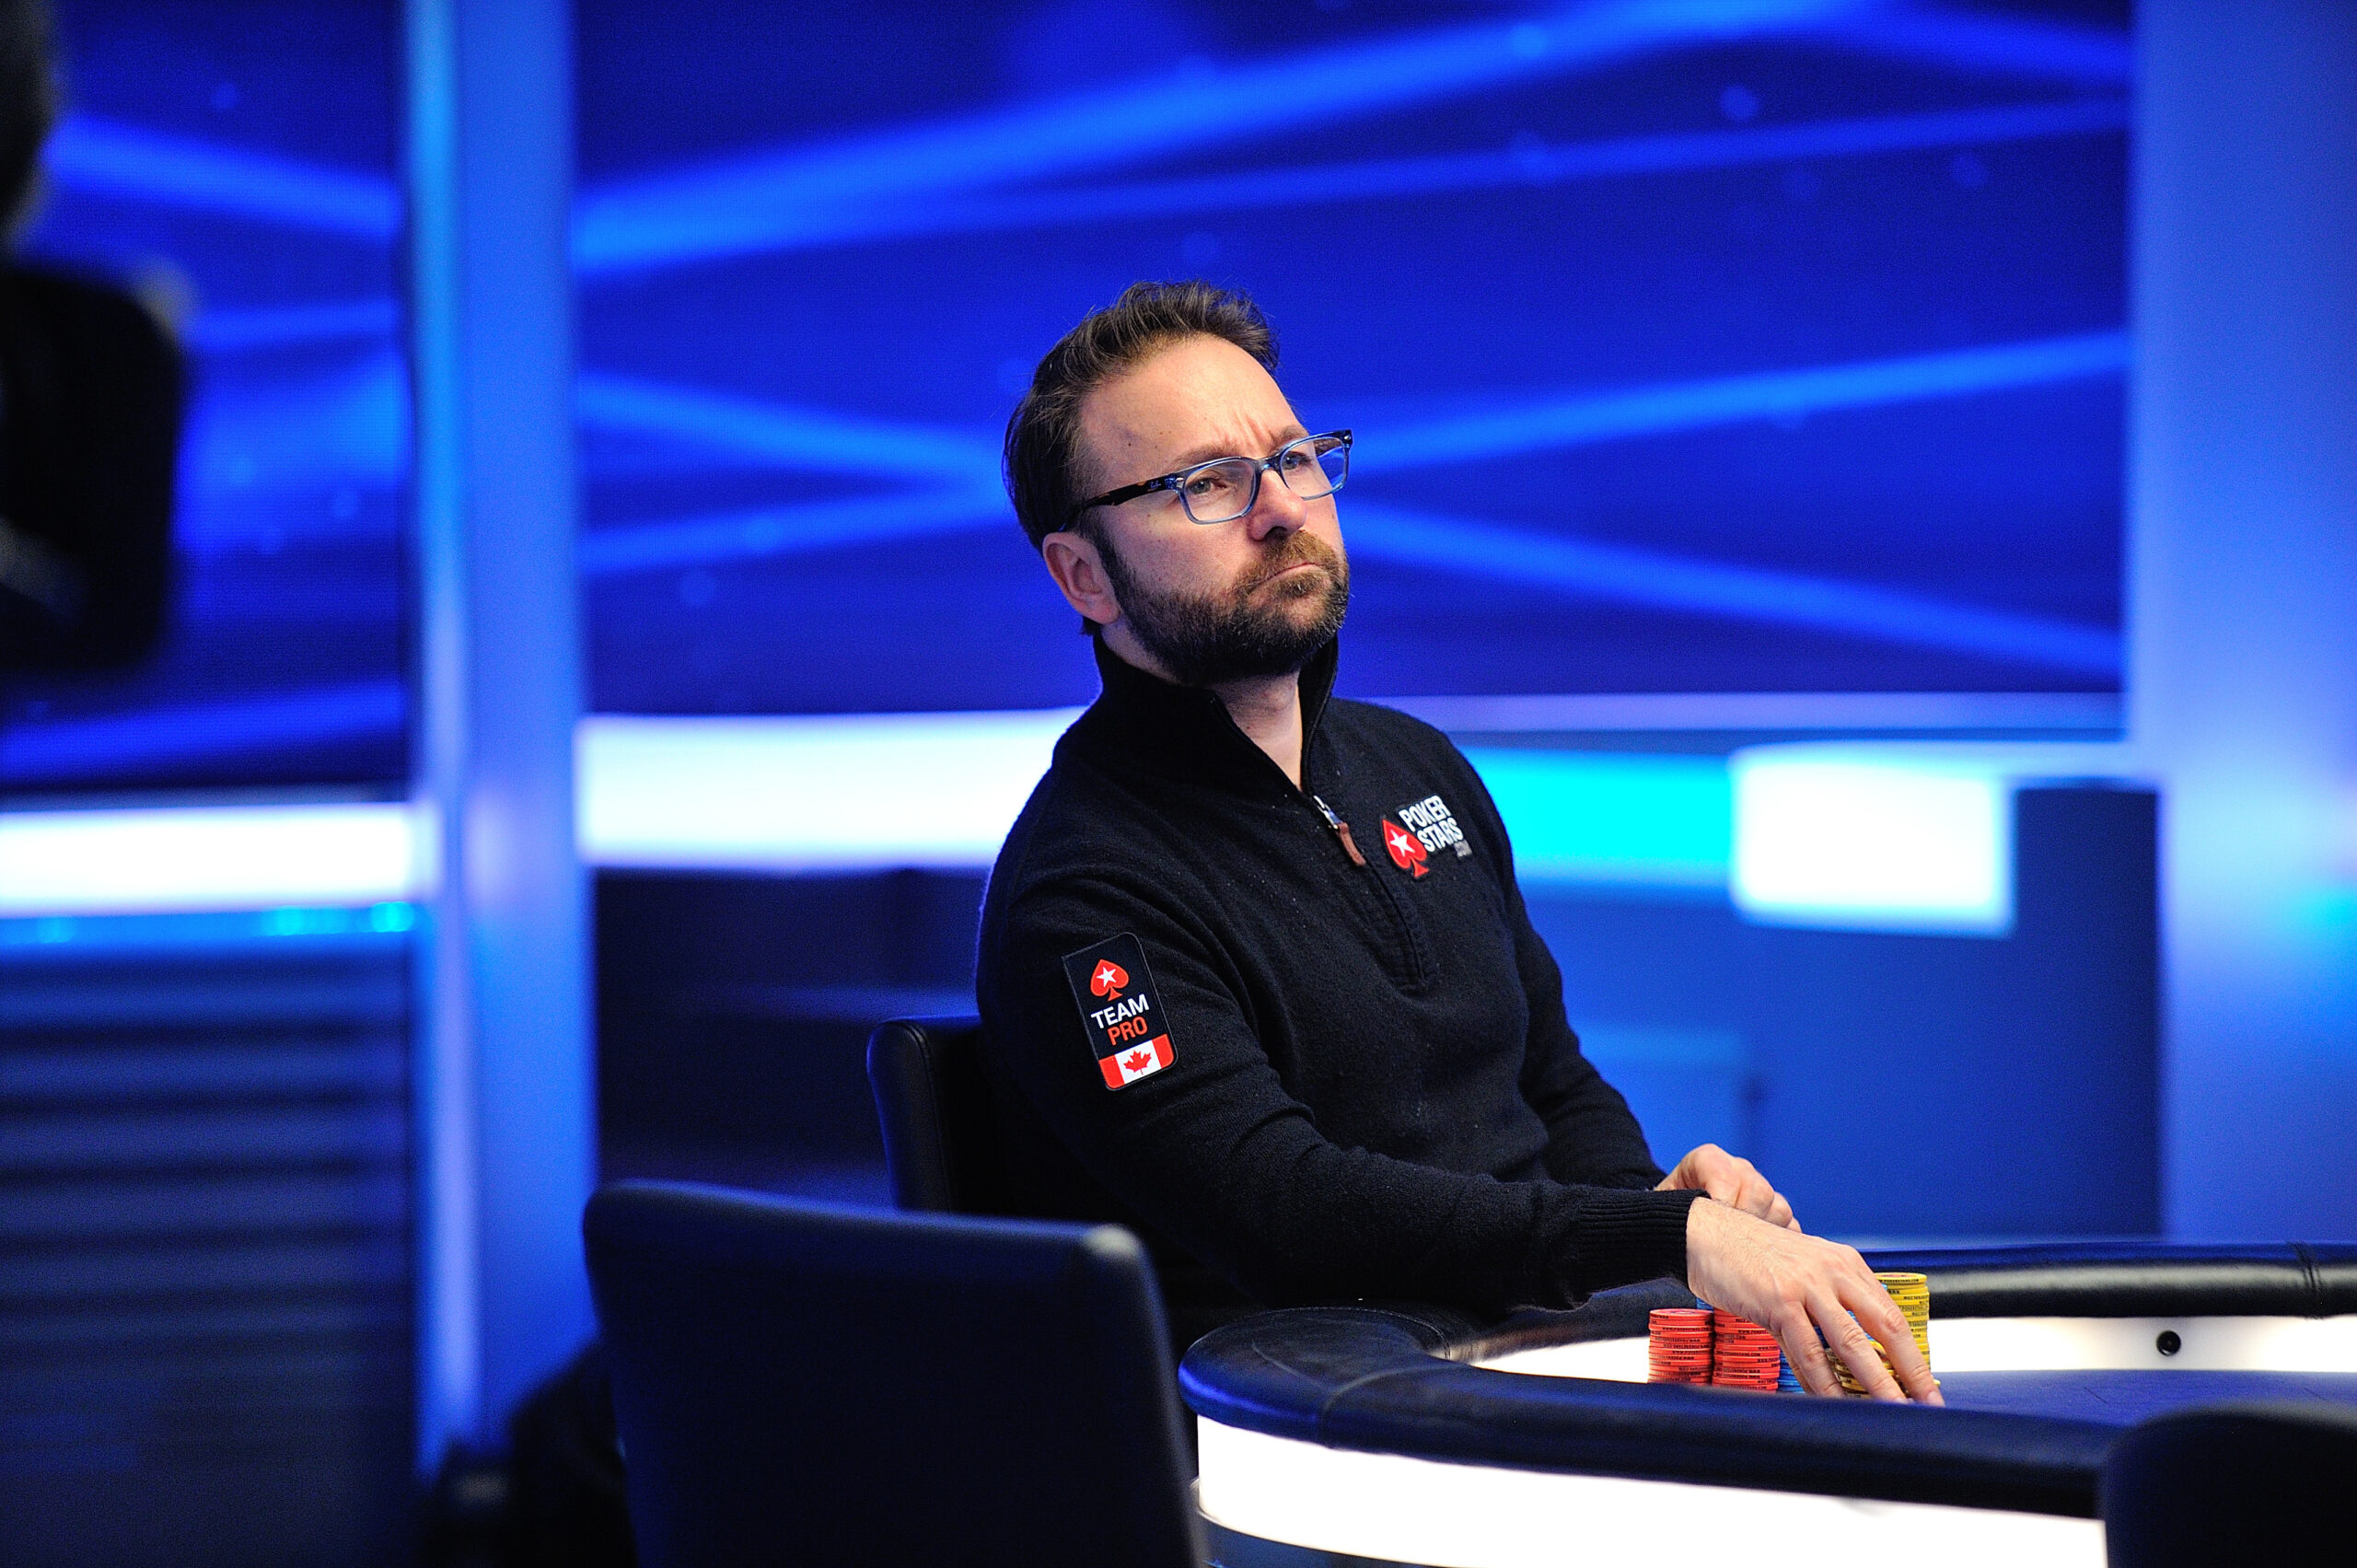 Daniel Negreanu Takes Another Shot at Clarifying Stance on Benefits of Higher Rake